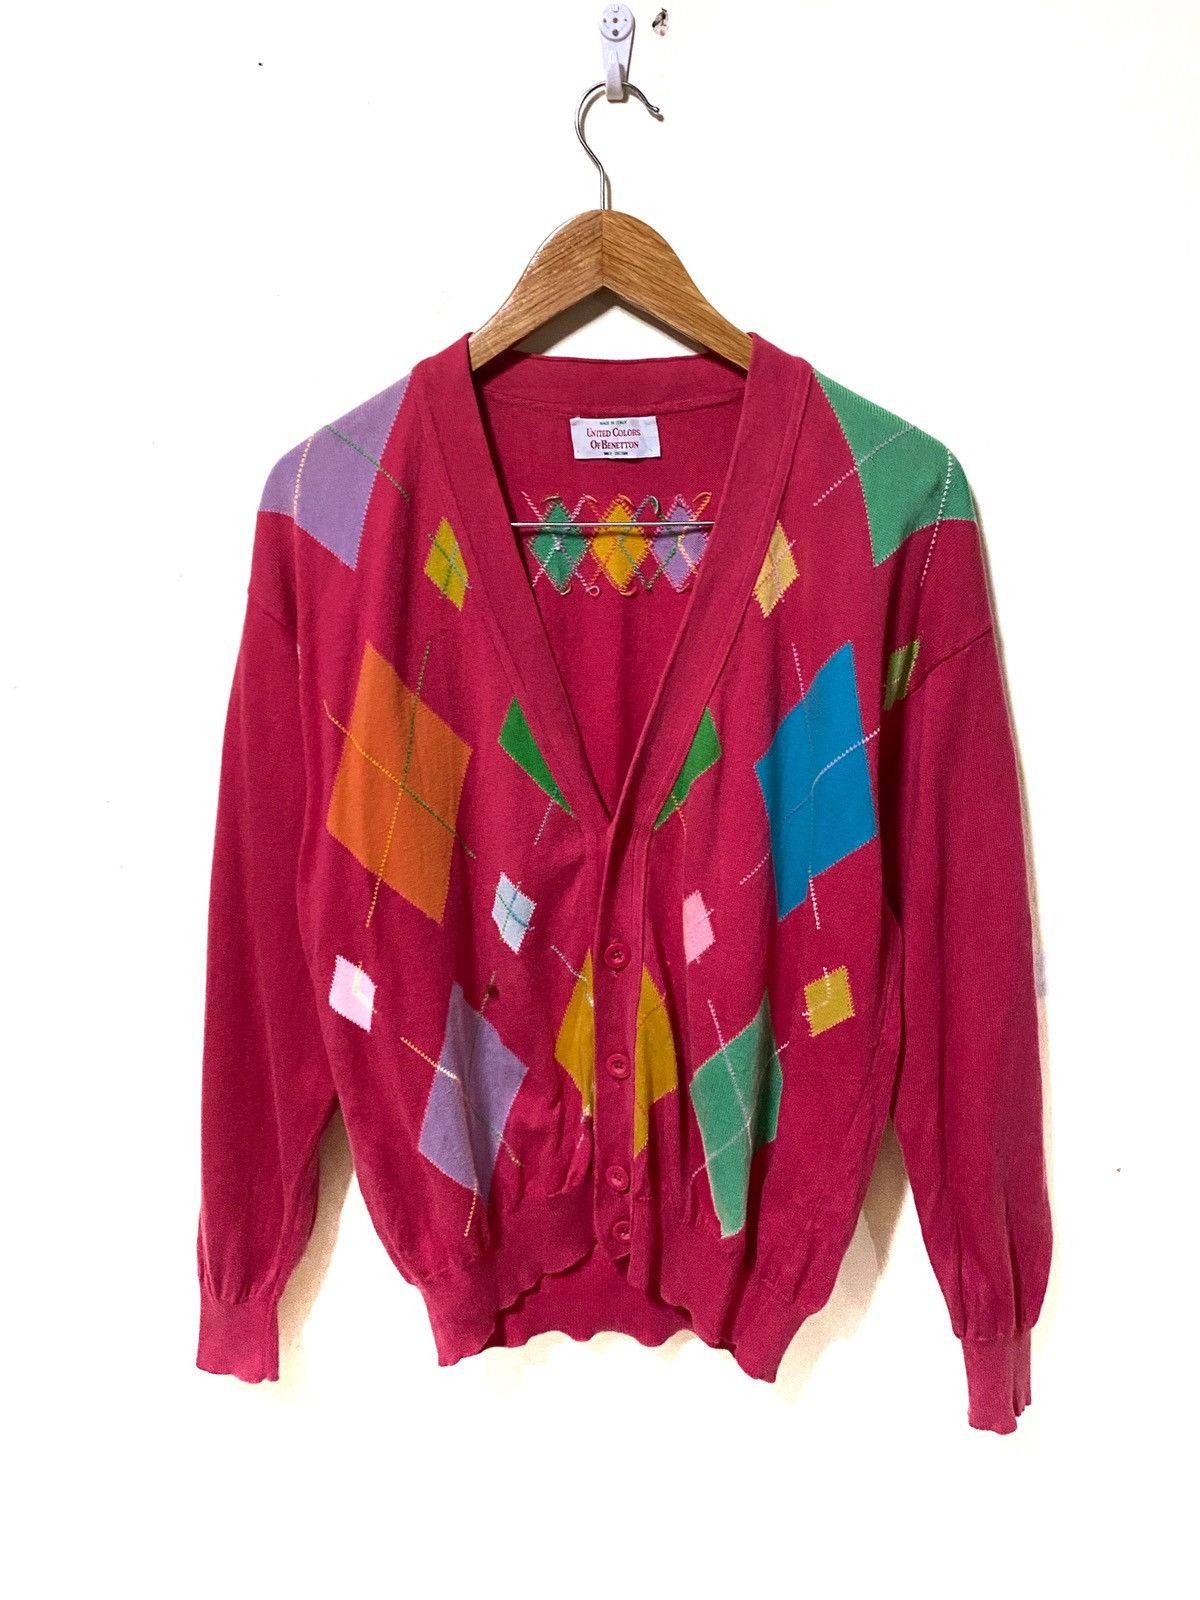 Vintage United Colors of Benetton Multicolor Knit Cardigan - 1